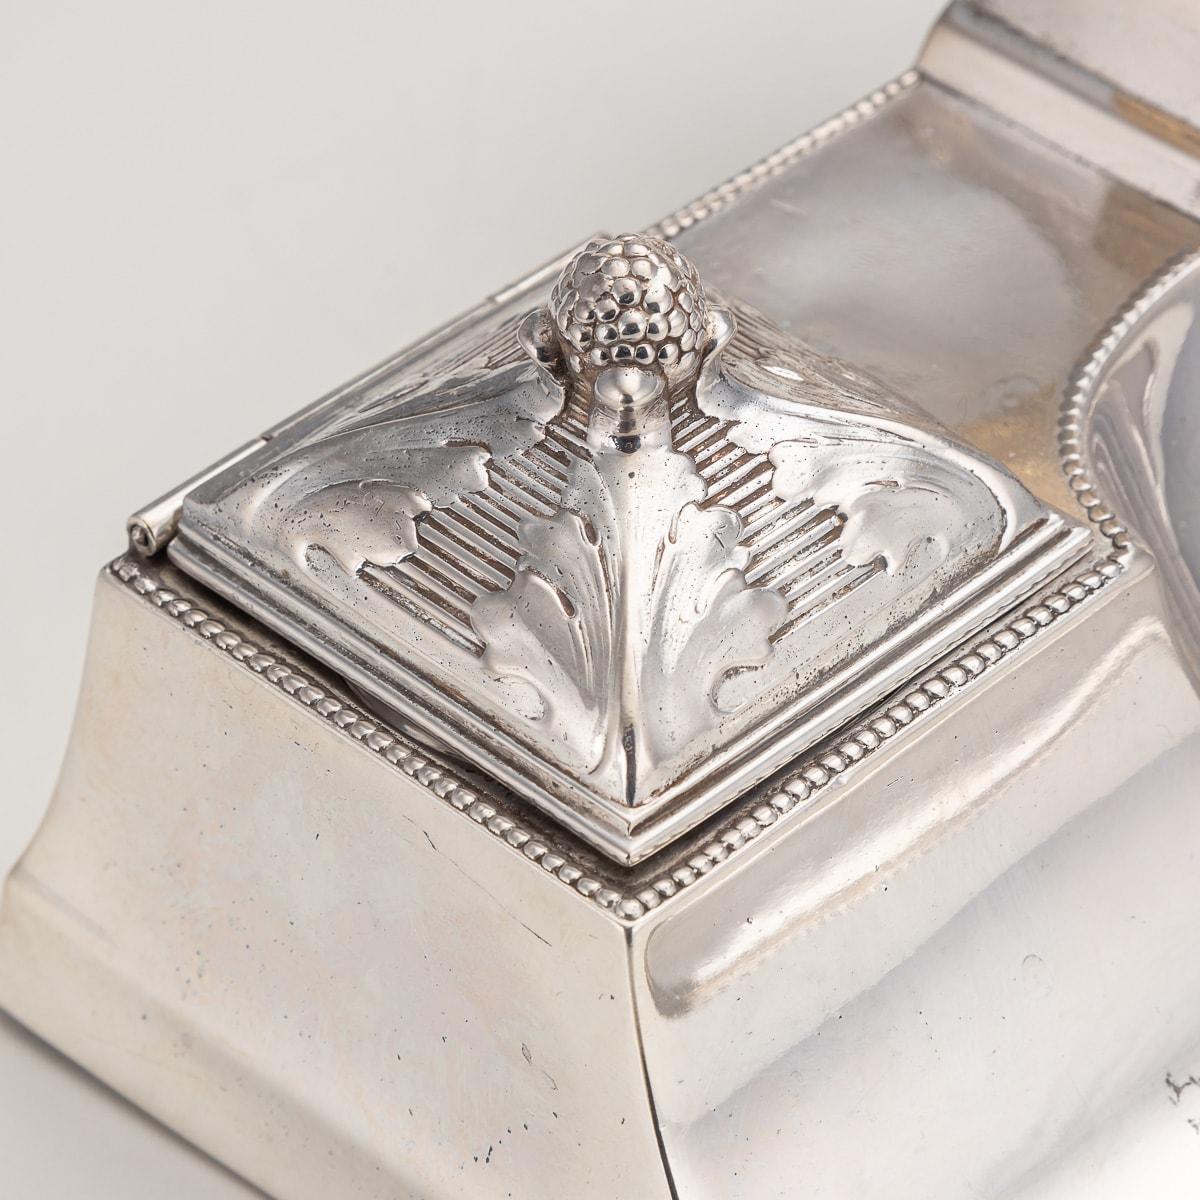 20th Century German Wmf Silver Double Inkwell With Aeroplane Theme, c.1920 7